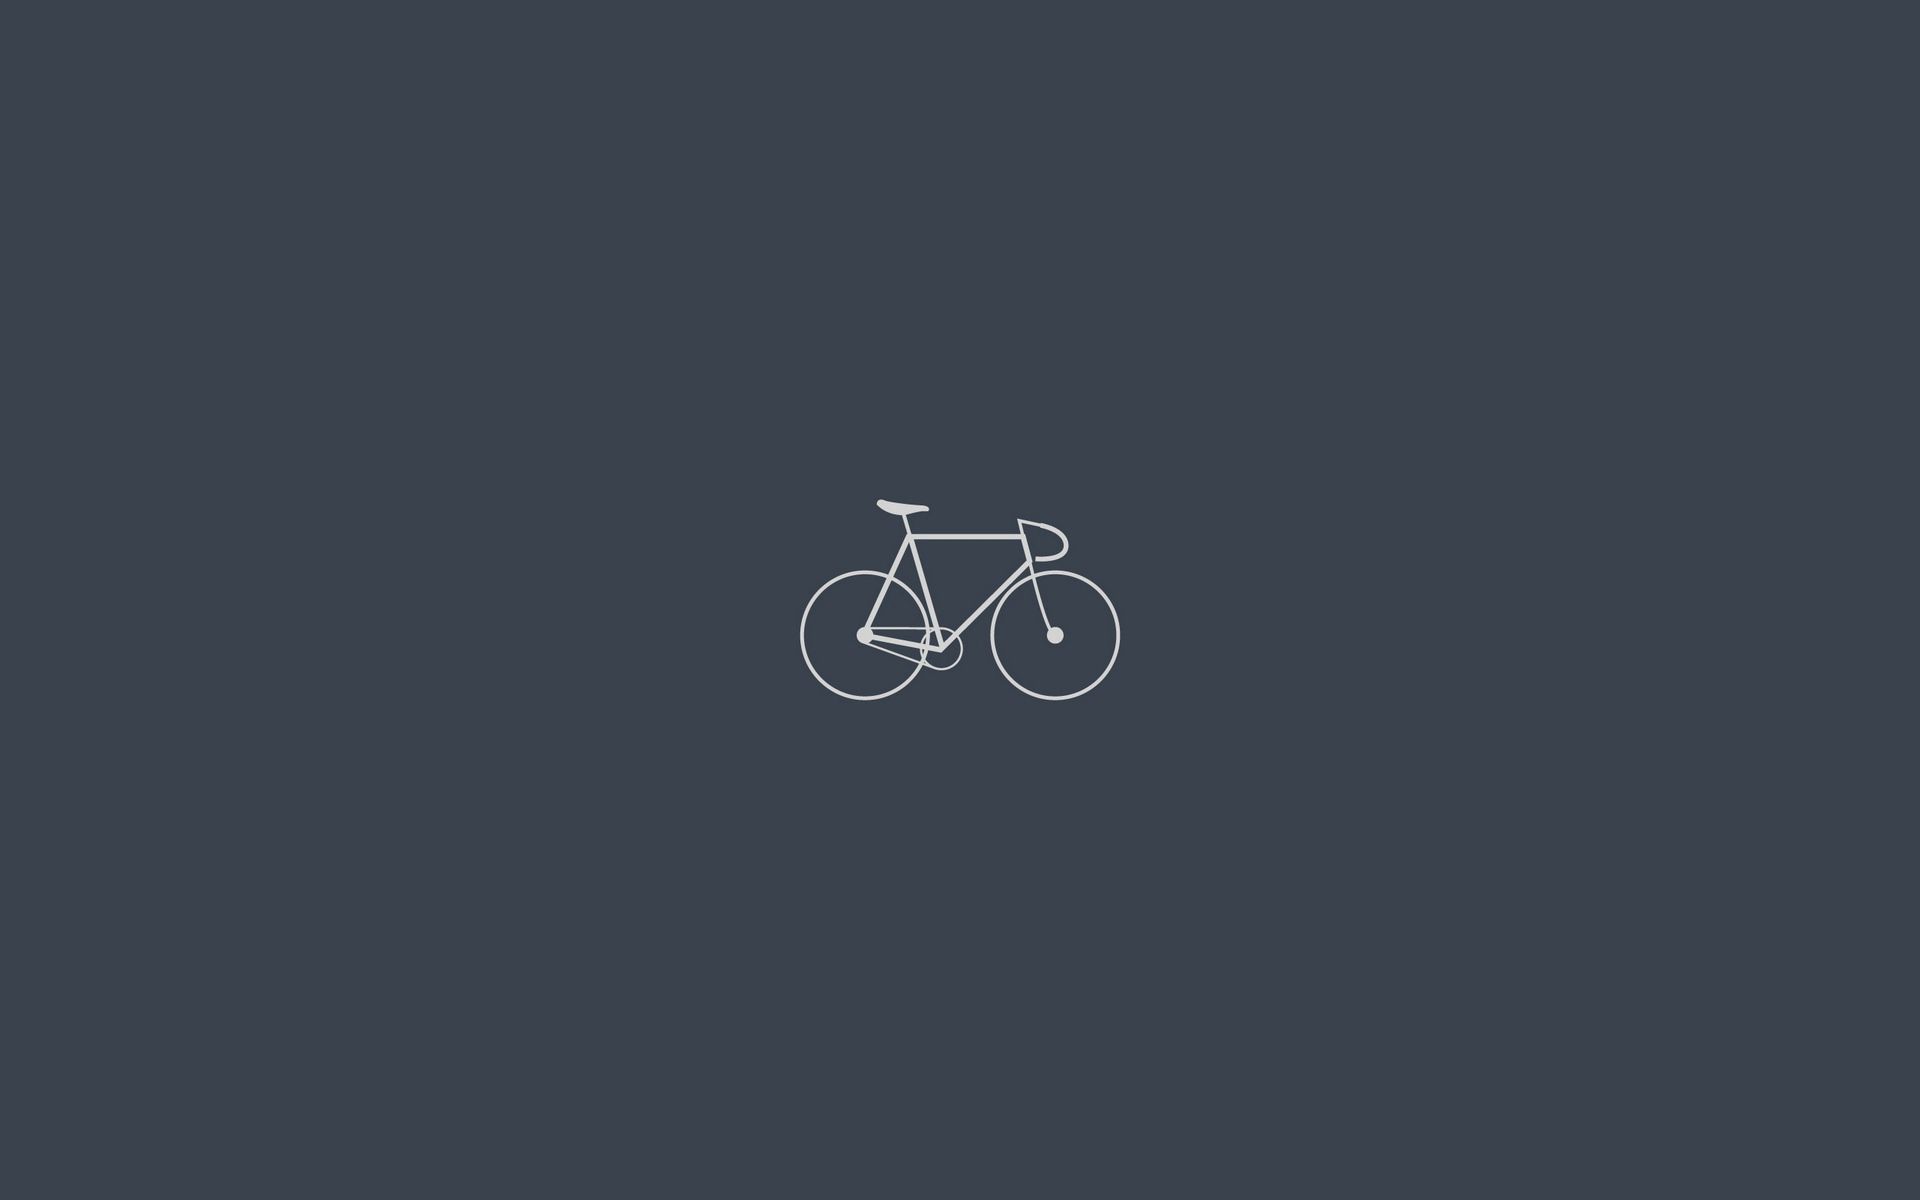 Best Bicycle wallpapers for phone screen